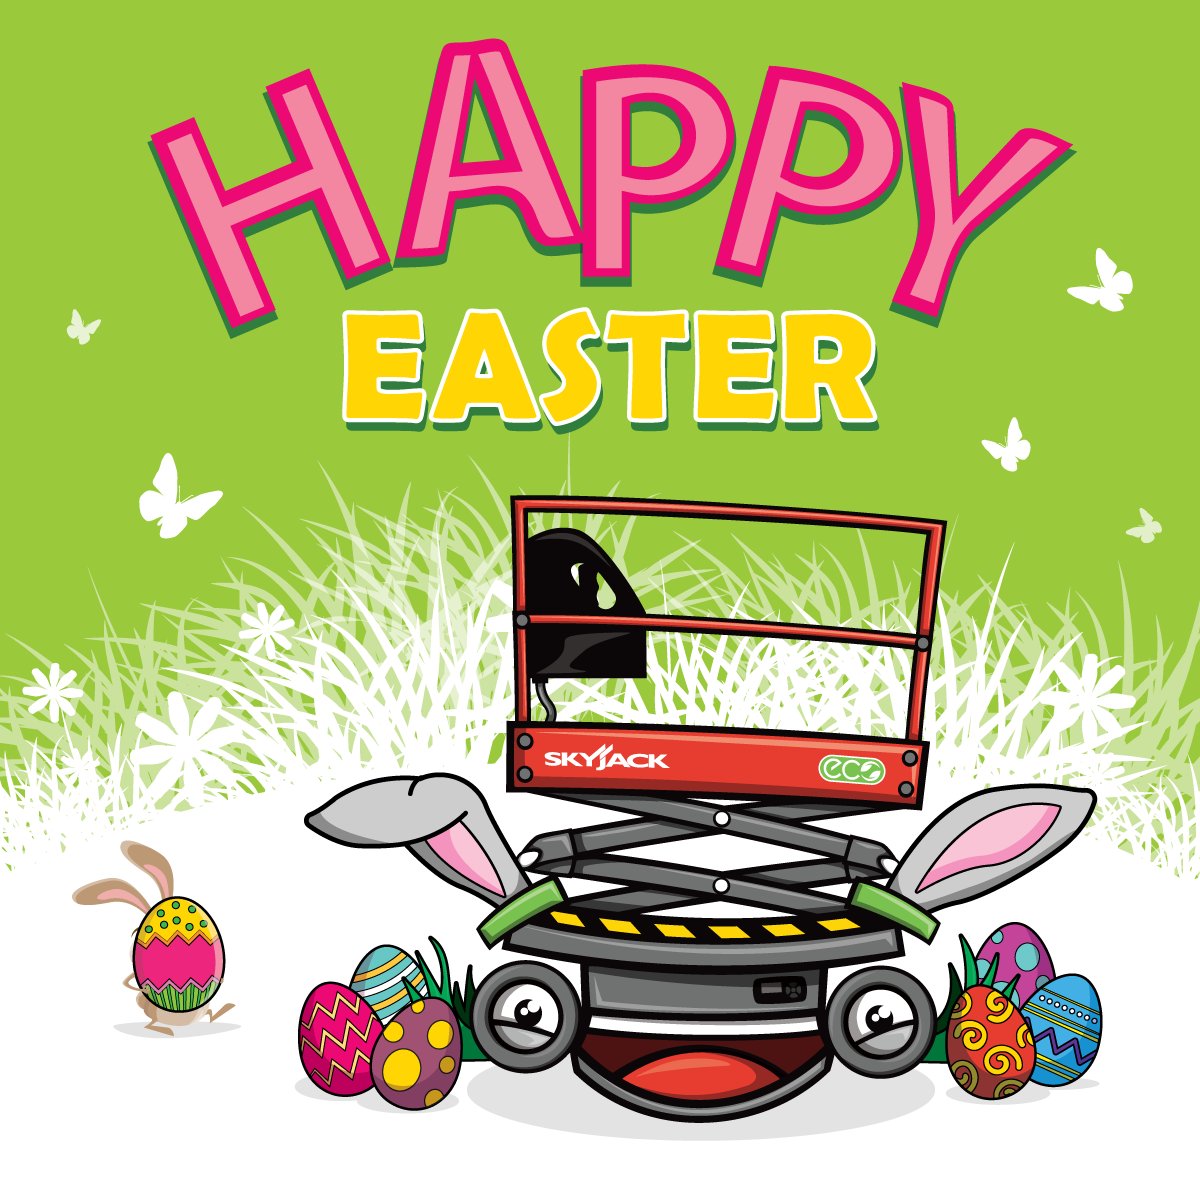 Wishing everyone a Happy Easter! Have an egg-cellent long weekend!